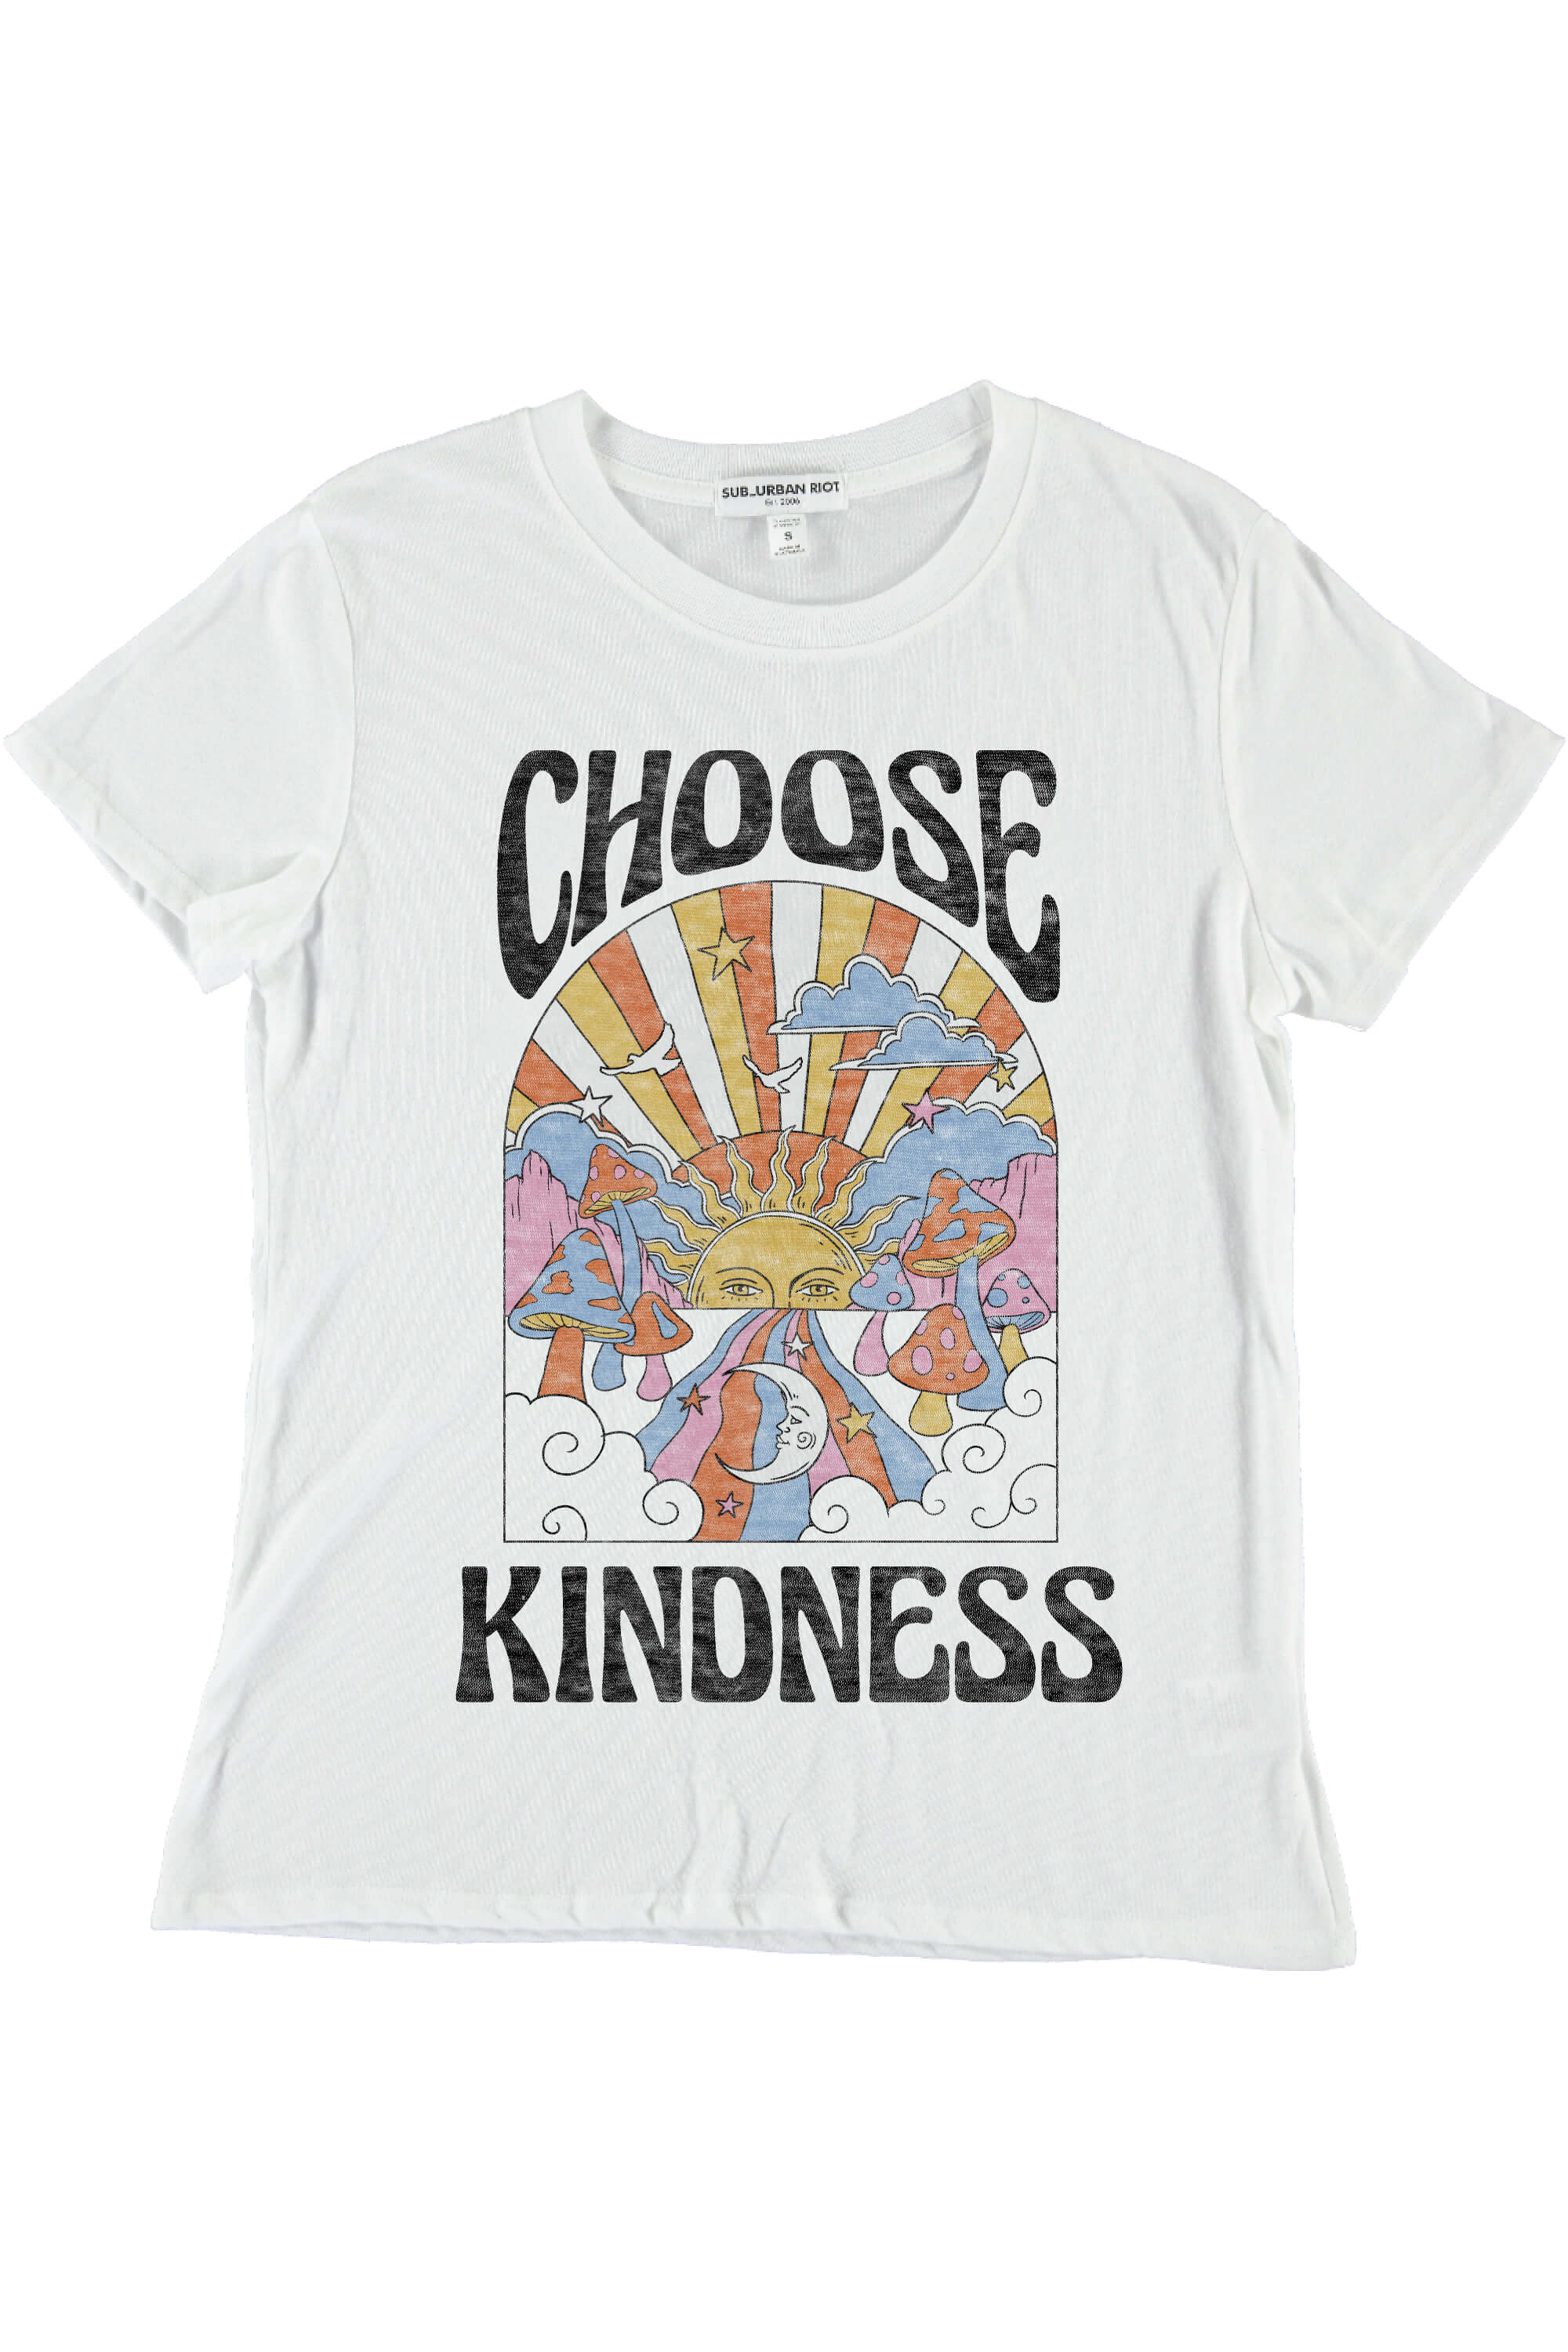 CHOOSE KINDNESS HIPPIE YOUTH SIZE LOOSE TEE